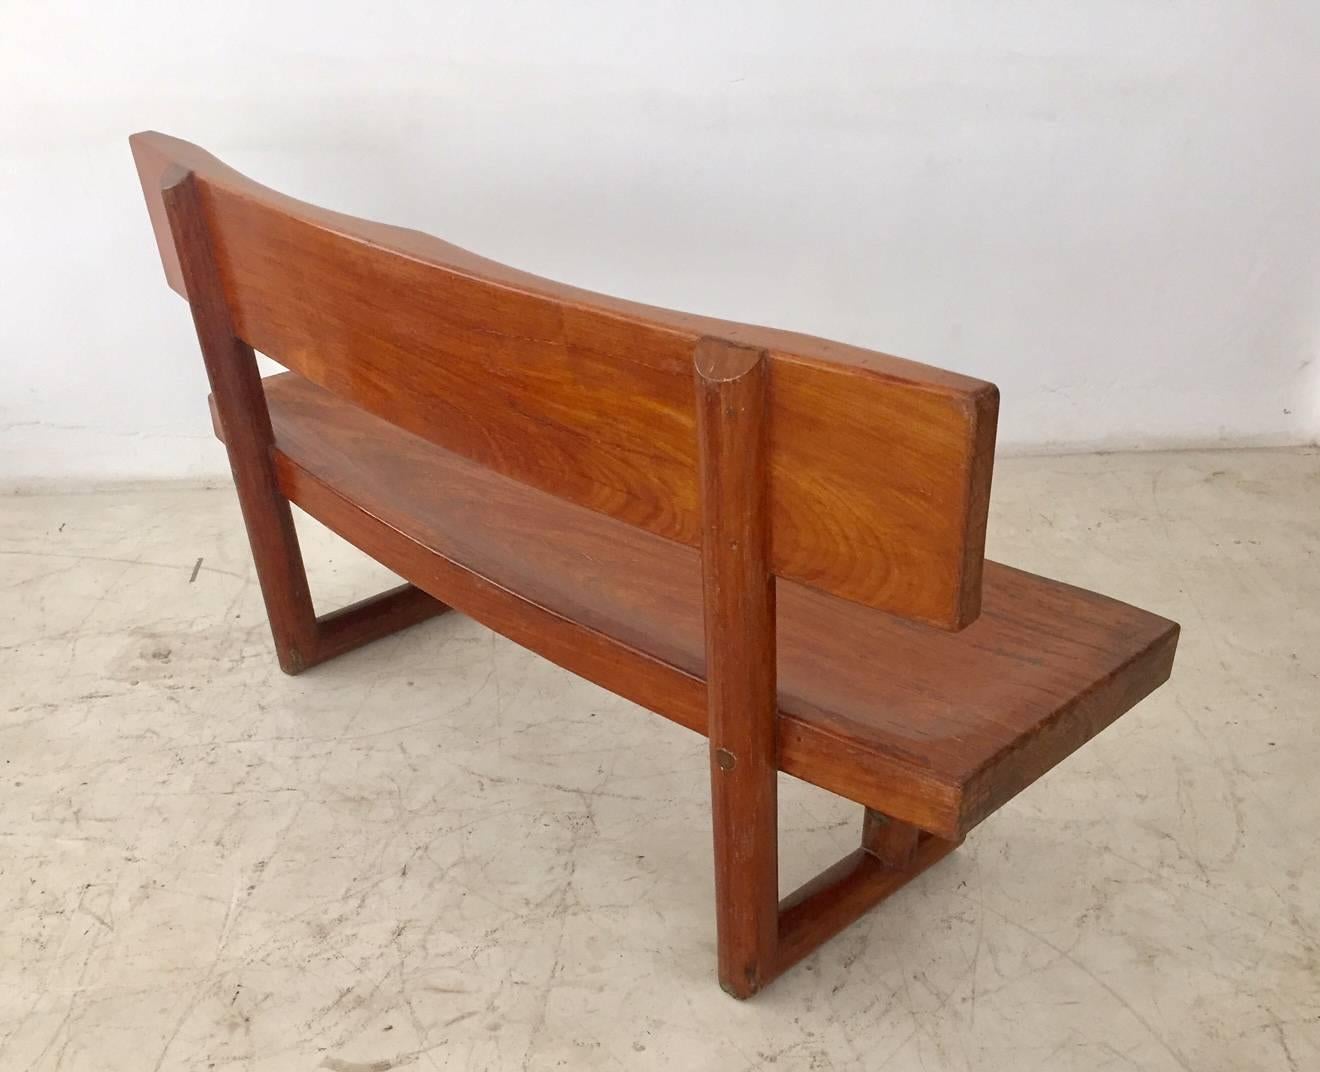 Brazilian modern bench, design and manufactured by Zanine Caldas, this curved bench is a masterpiece of Zanine Caldas, very comfortable with the seats carved in the wood. It was manufactured to a residence projected by the designer in Brasilia,